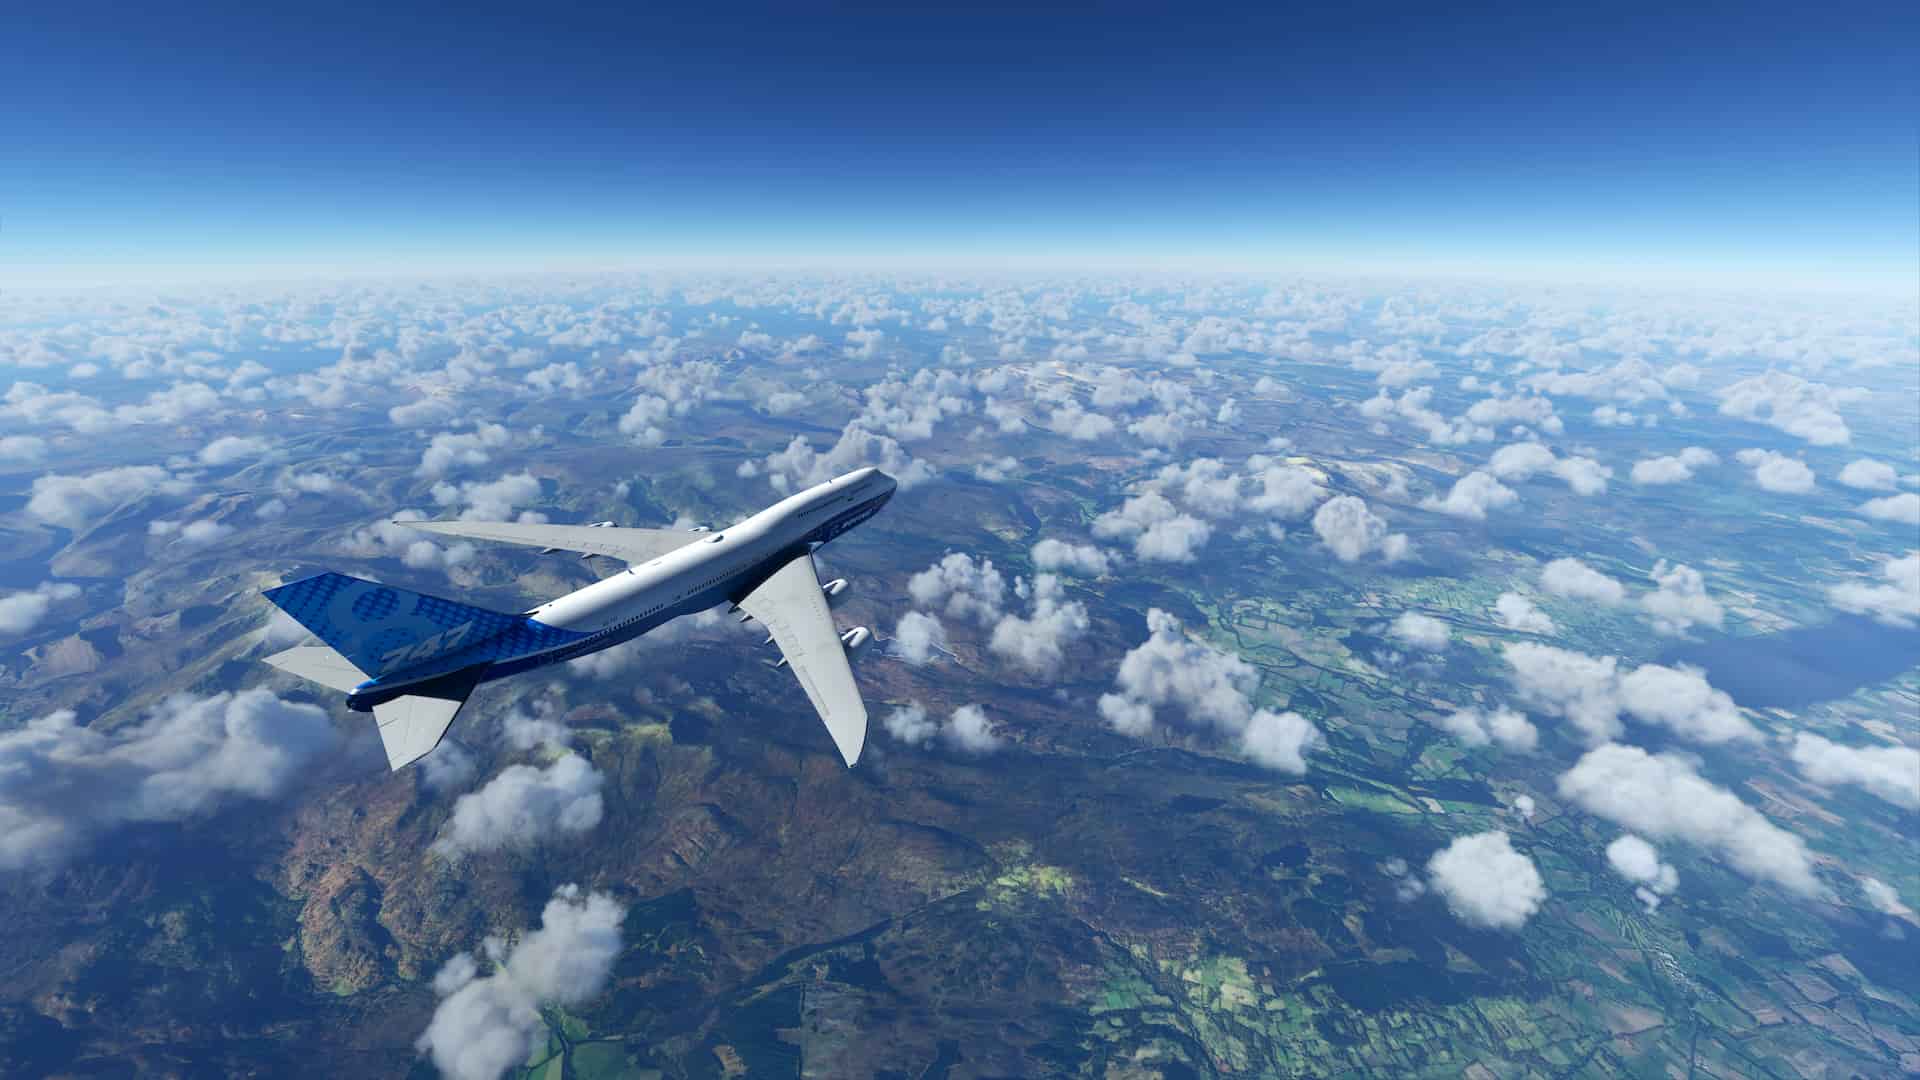 Microsoft Flight Simulator' is Finally Getting VR Controller Support,  Coming in Mid-November